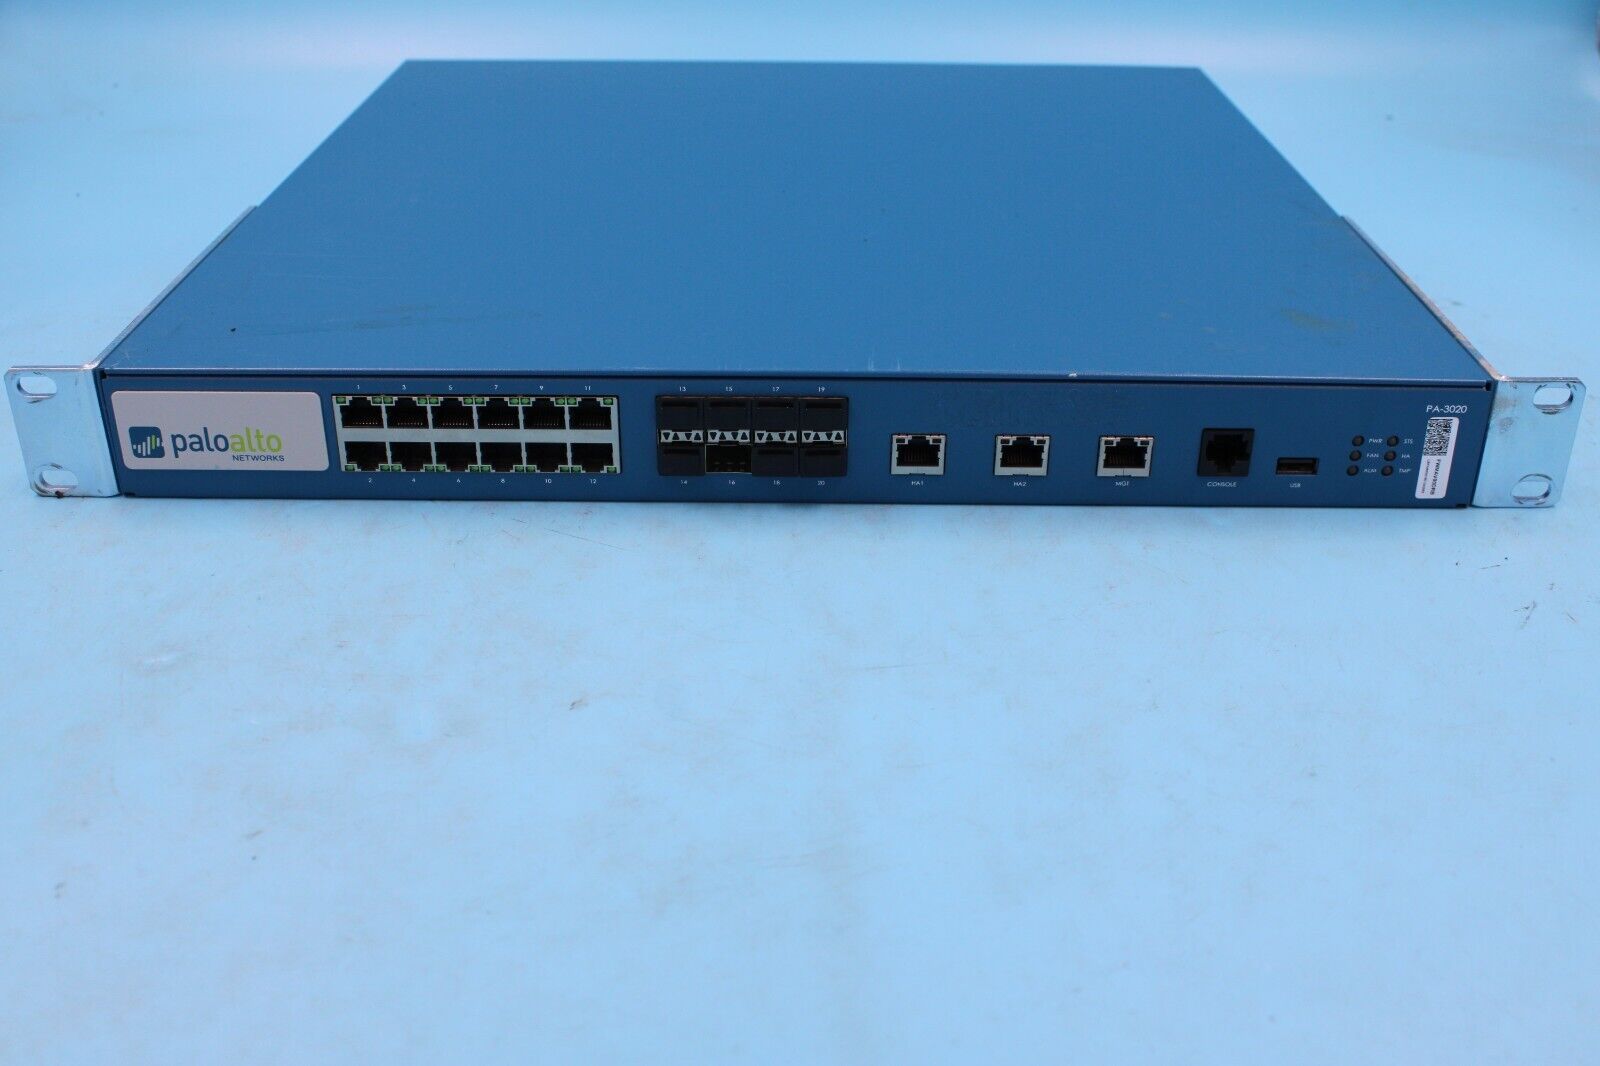 Palo Alto PA-3020 12-Port Network Security Firewall Appliance TESTED